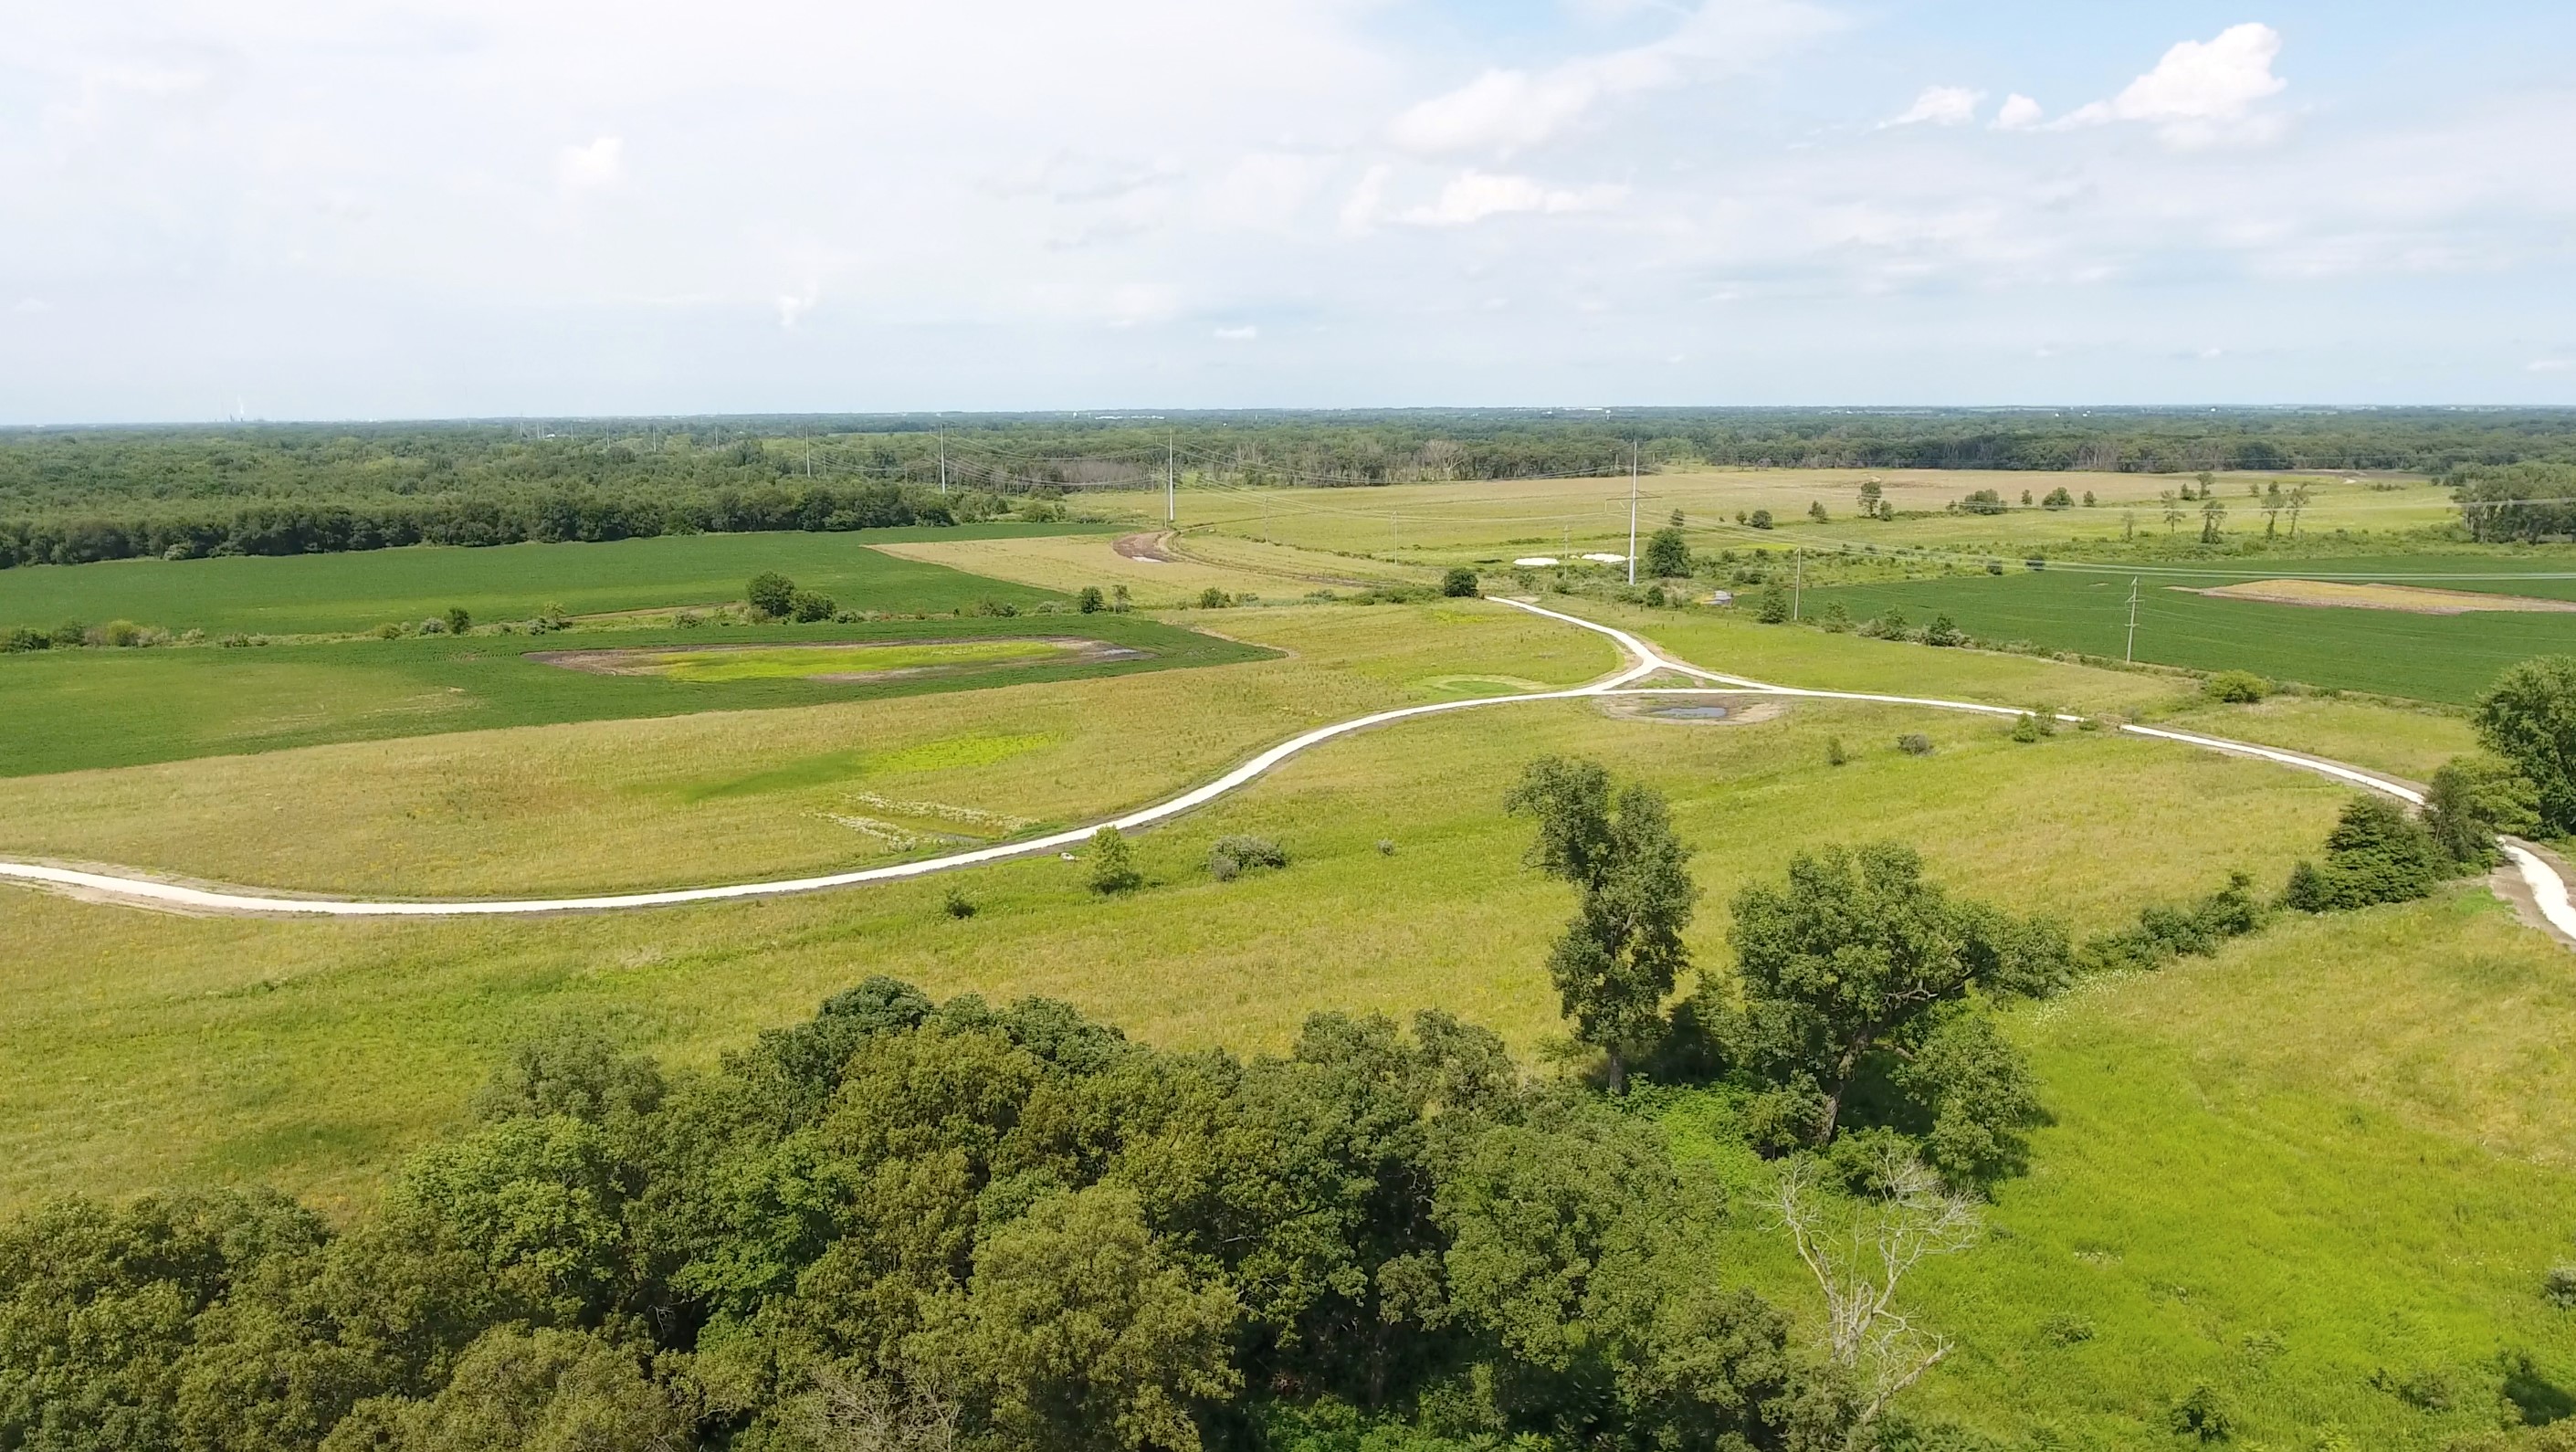 An aerial view of KankaKee Sands Preserve.